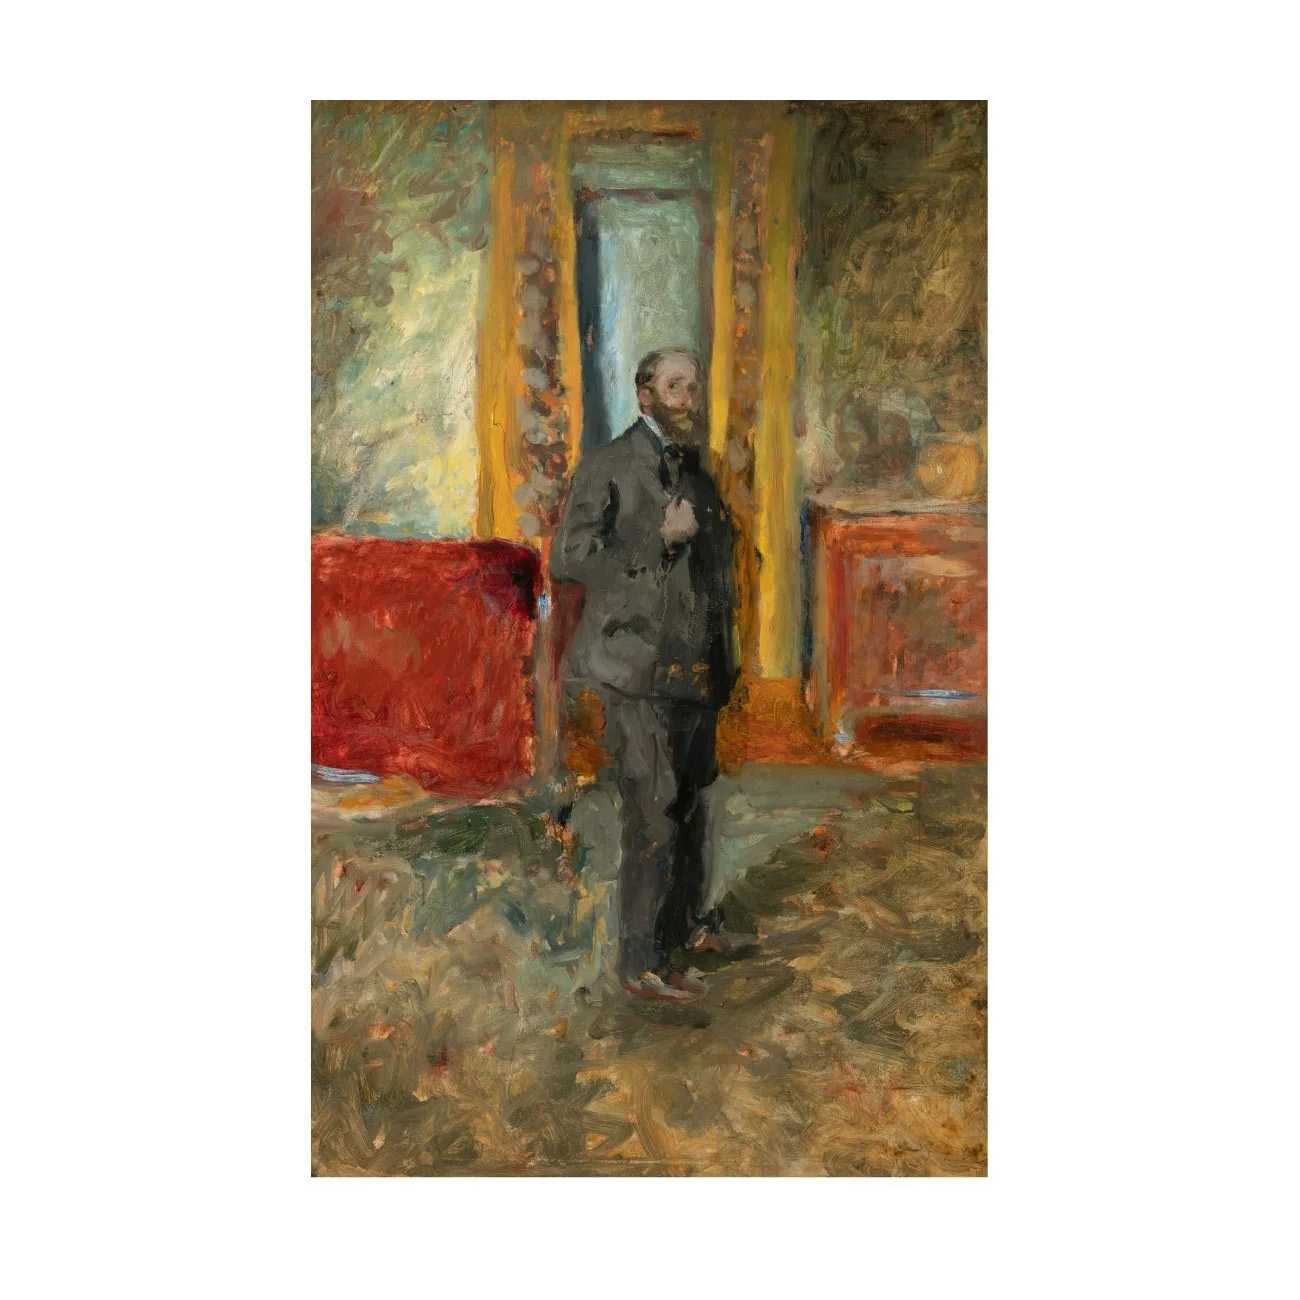 Full-length self-portrait by Édouard Vuillard leads our five lots to watch